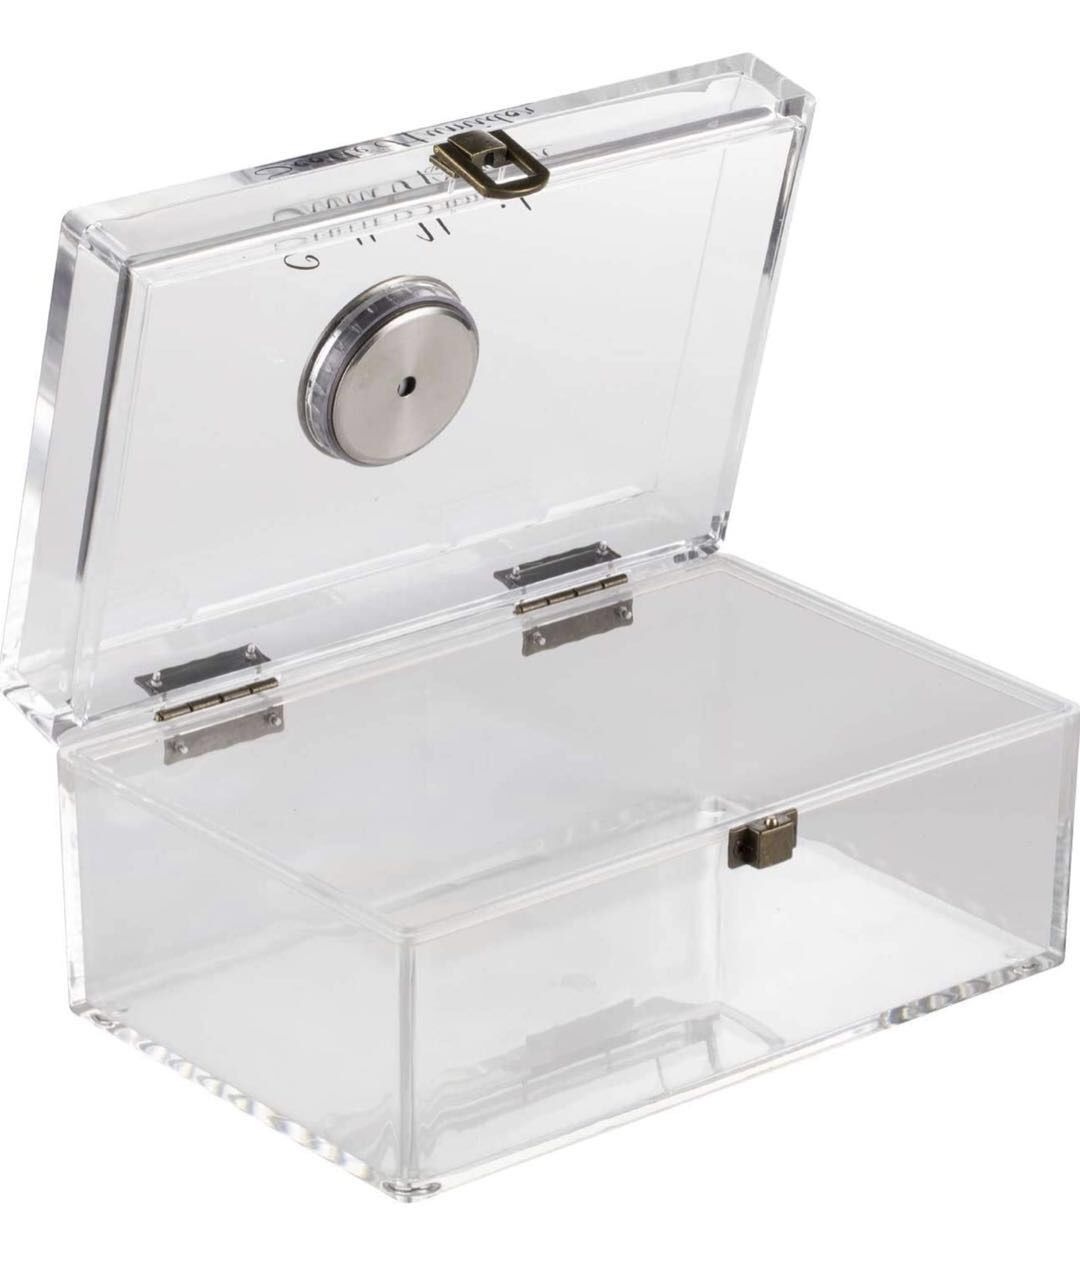 Scotte Acrylic Cigar Humidor Jar/case/Box with Humidifier and Hygrometer,humidor That can Hold About